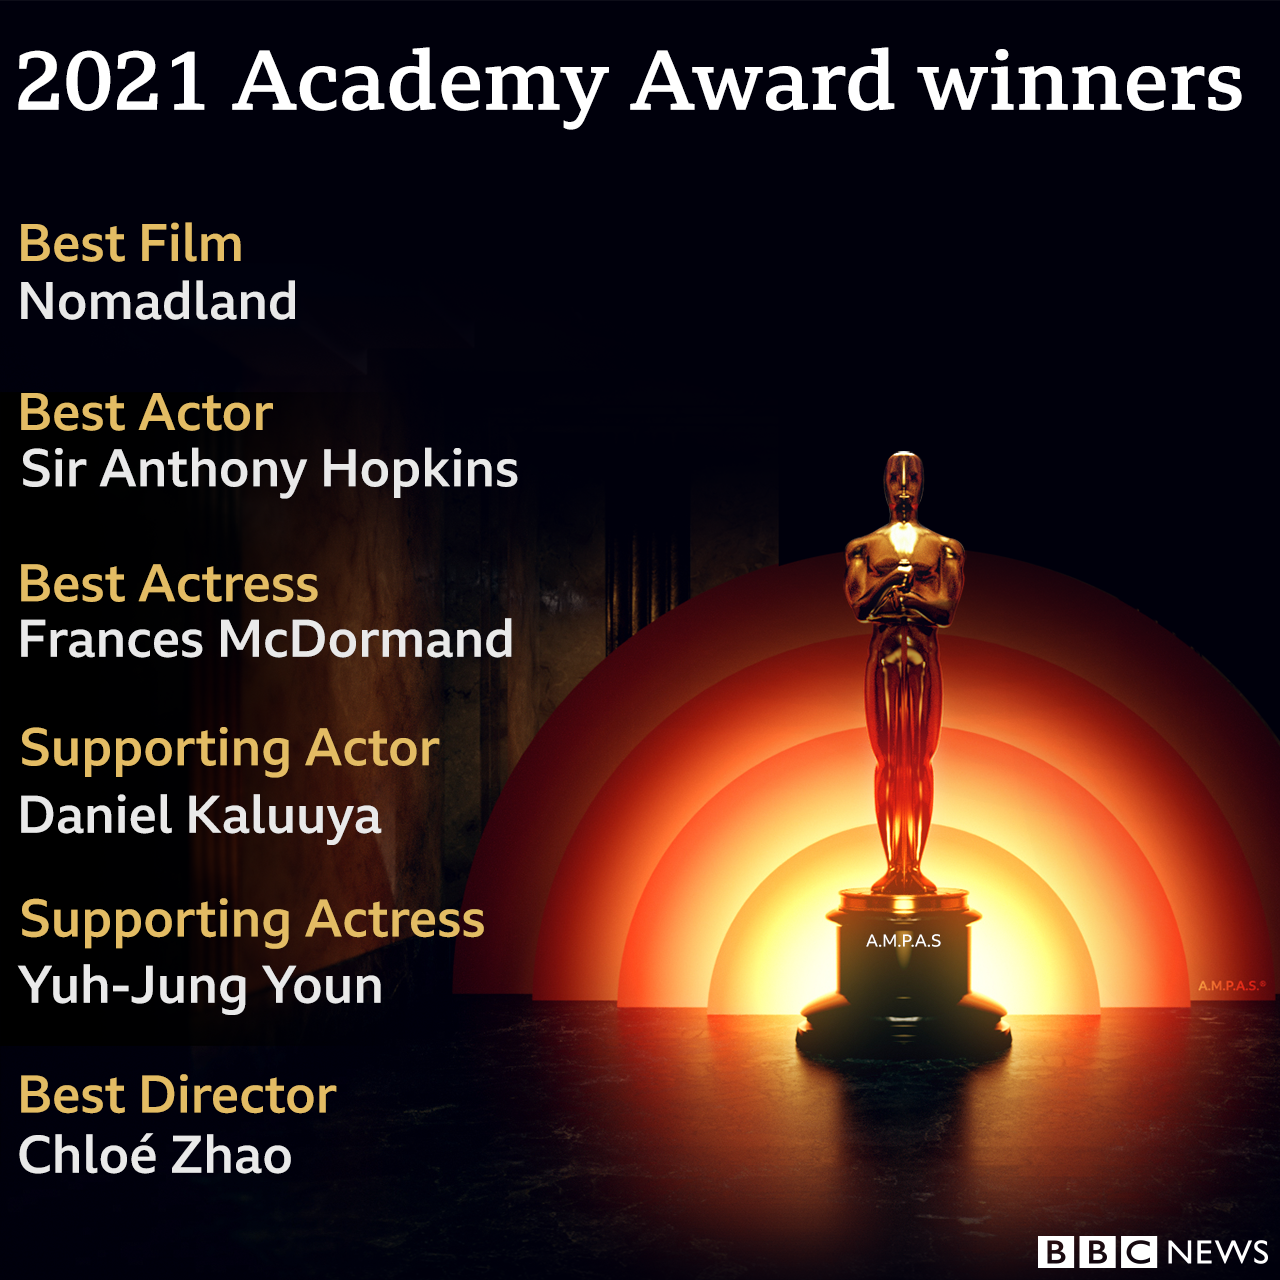 2021 Academy Arawrd winners: Best film - Nomadland; Best actor- Sir Anthony Hopkins; Best Actress - Frances McDormand ; Best supporting Actor - Daniel Kaluuya; Best supporting Ctress - Yuh-Jung Youn; Best director - Chloé Zhao.